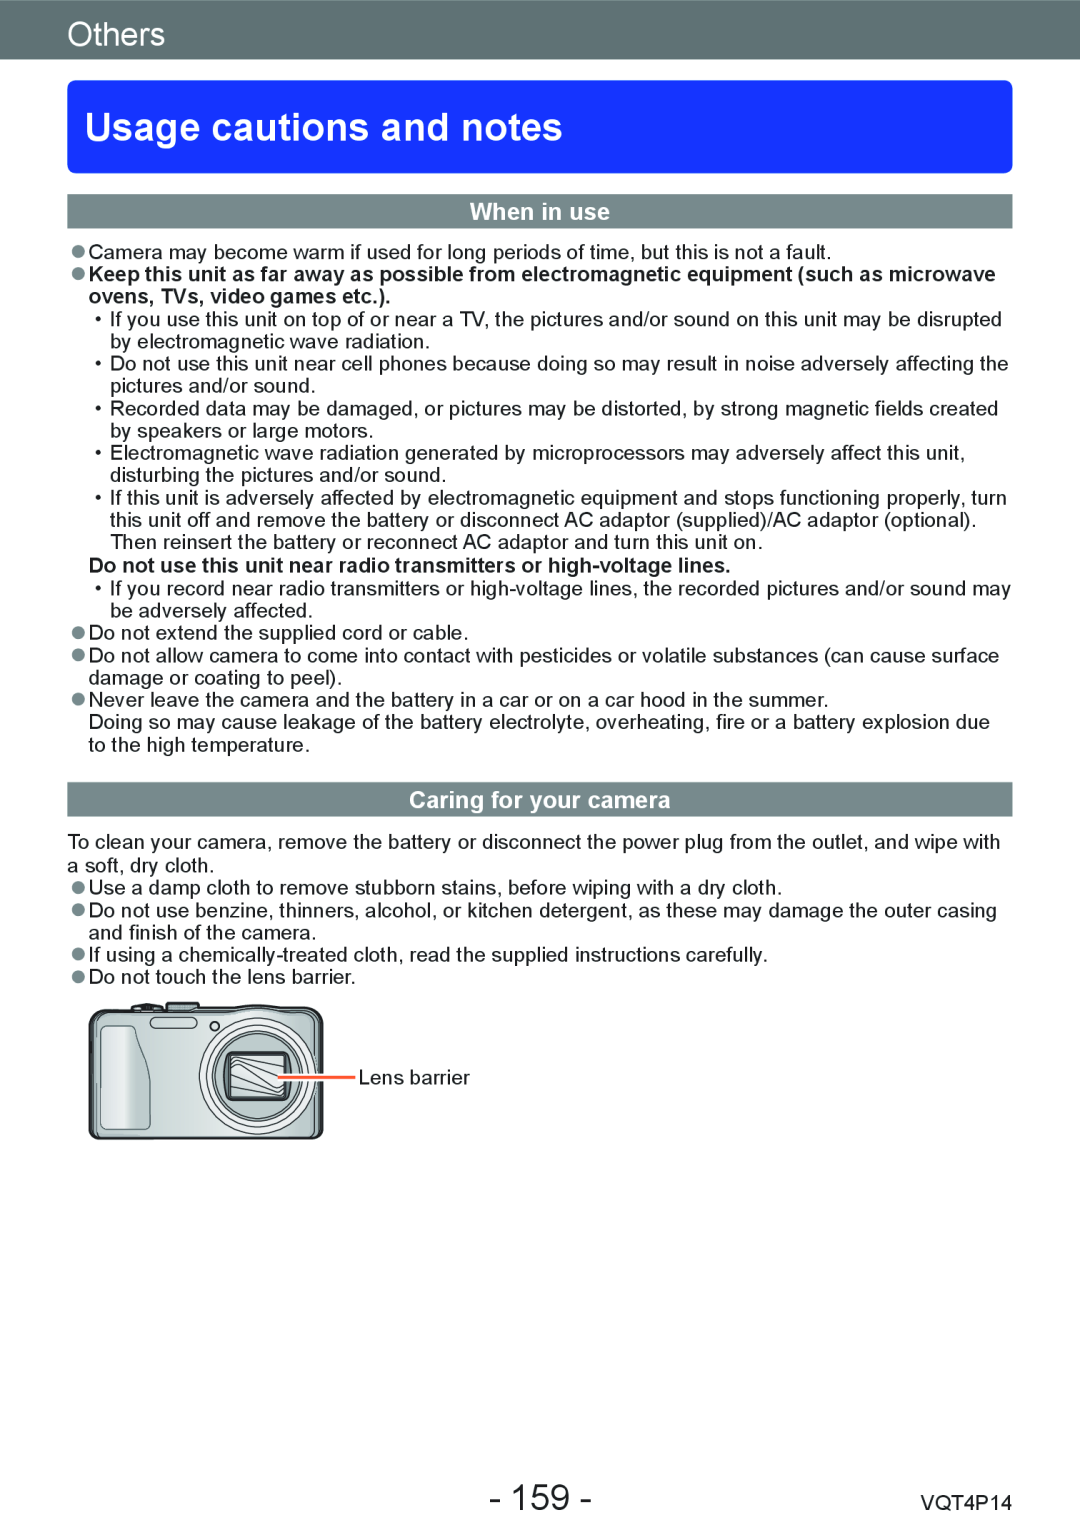 Panasonic DMCZS25K, DMC-ZS25 owner manual Usage cautions and notes, When in use, Caring for your camera, Others 